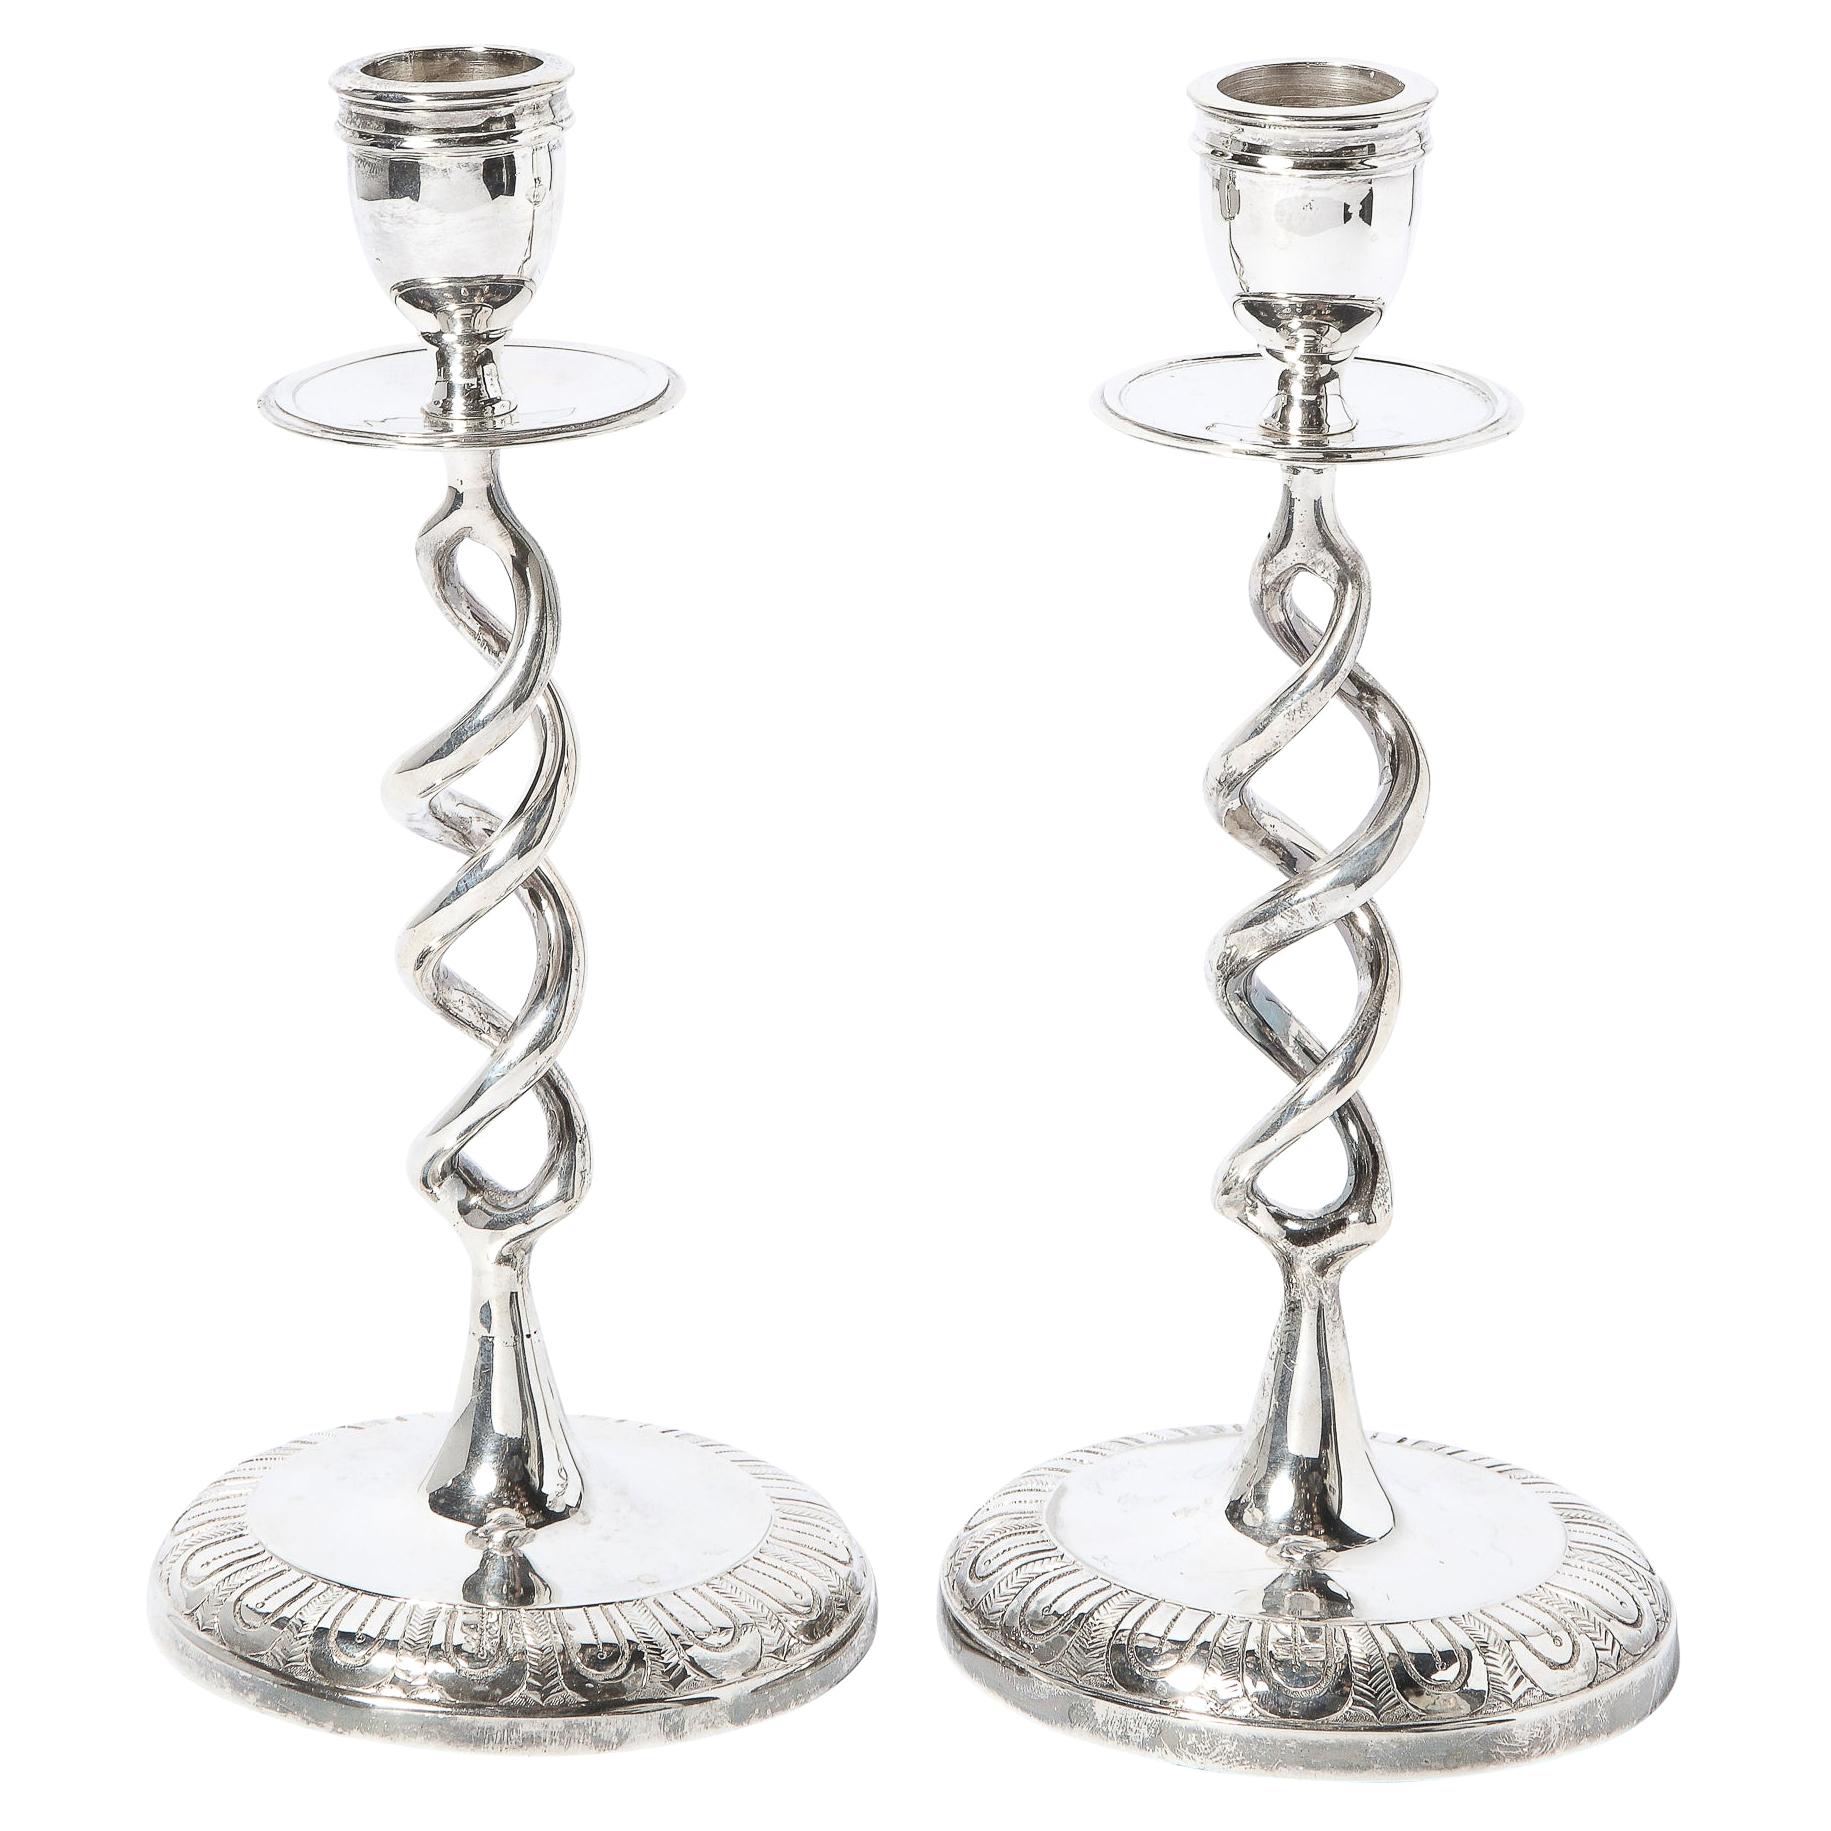 Pair of British Mid-Century Modern Nickel Helix Form Candle Holders